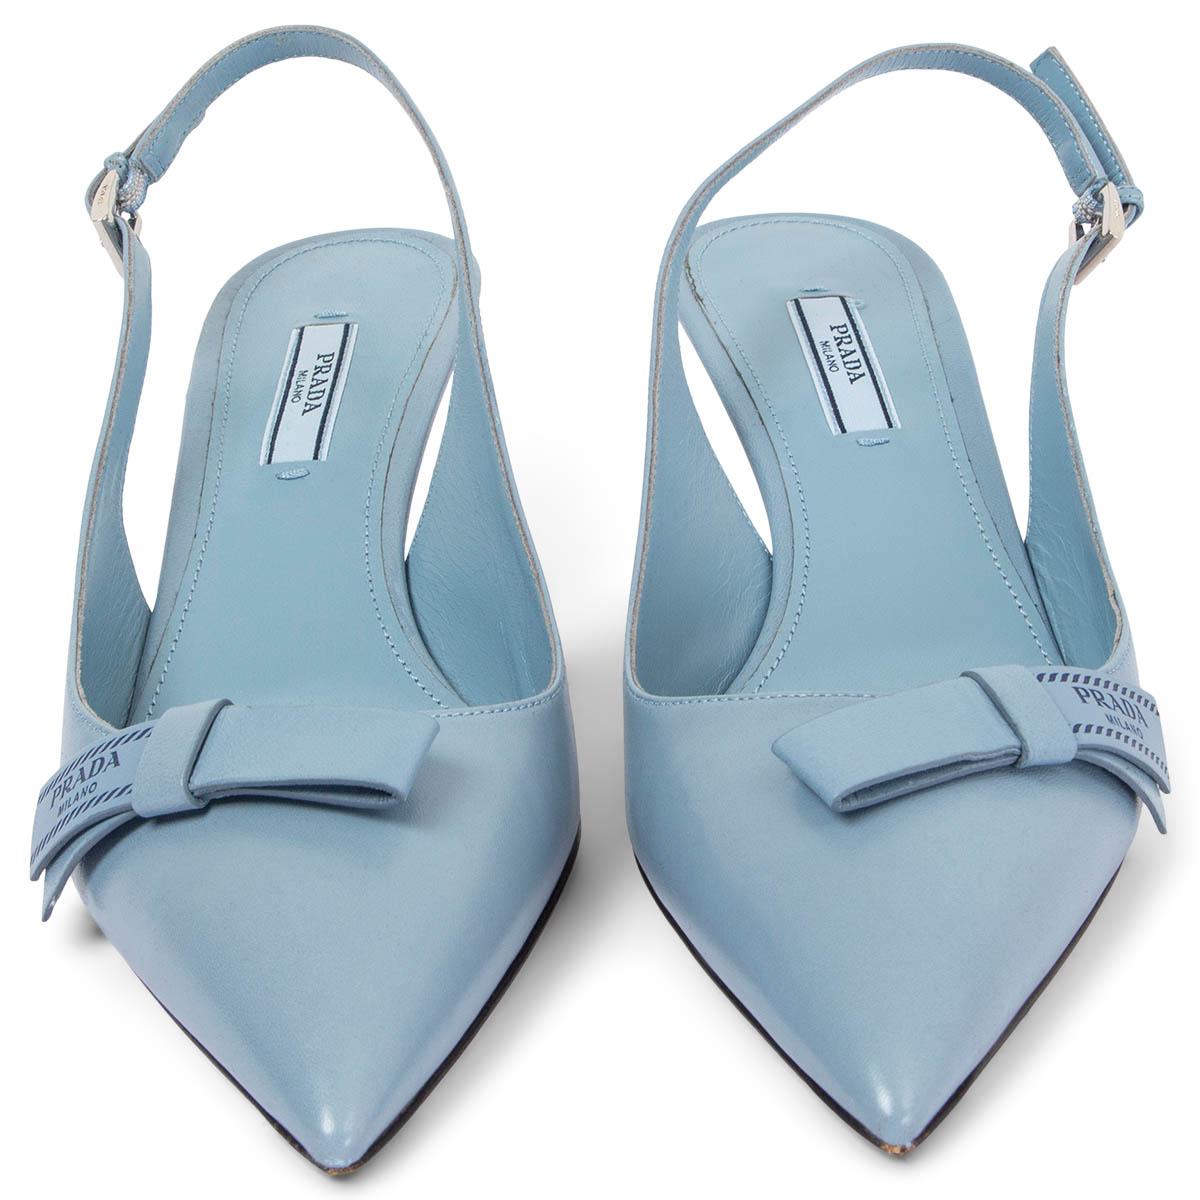 100% authentic Prada pointed-toe kitten-heel slingbacks in smooth baby blue calfskin featuring logo bow-detail. Have been worn once ot twice and are in excellent condition. Come with dust bag.

Measurements
Imprinted Size	40
Shoe Size	40
Inside